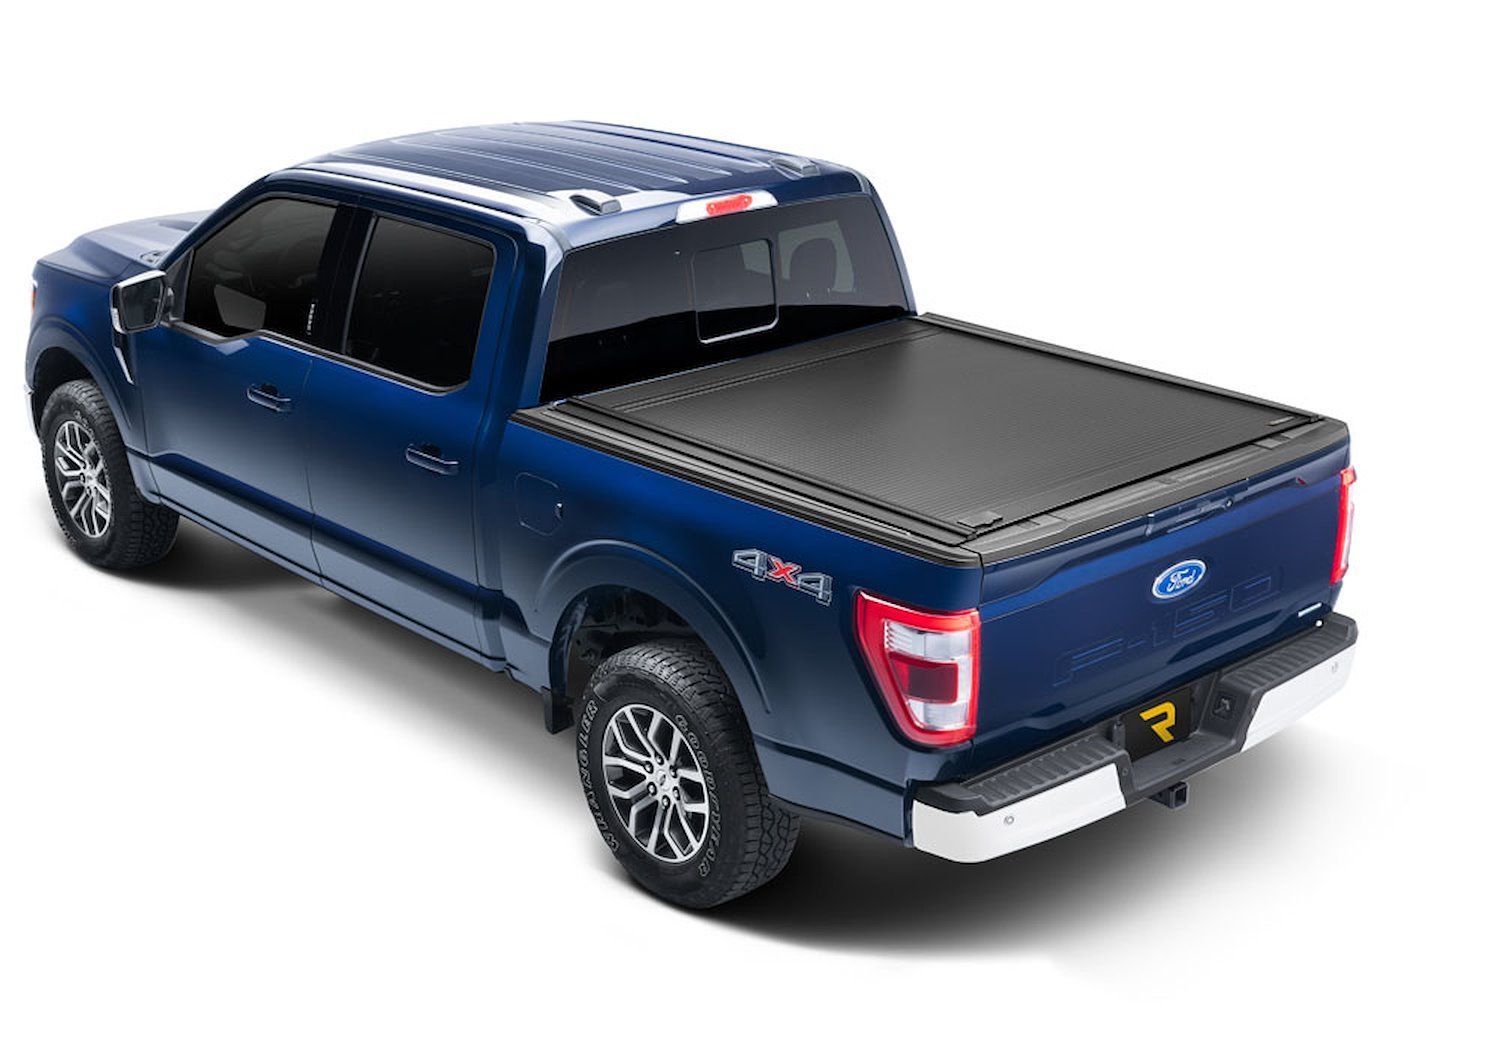 60378 RetraxOne MX Retractable Tonneau Cover Fits Select Ford F-150 5' 7" Bed (Includes Lightning) without Stake Pockets